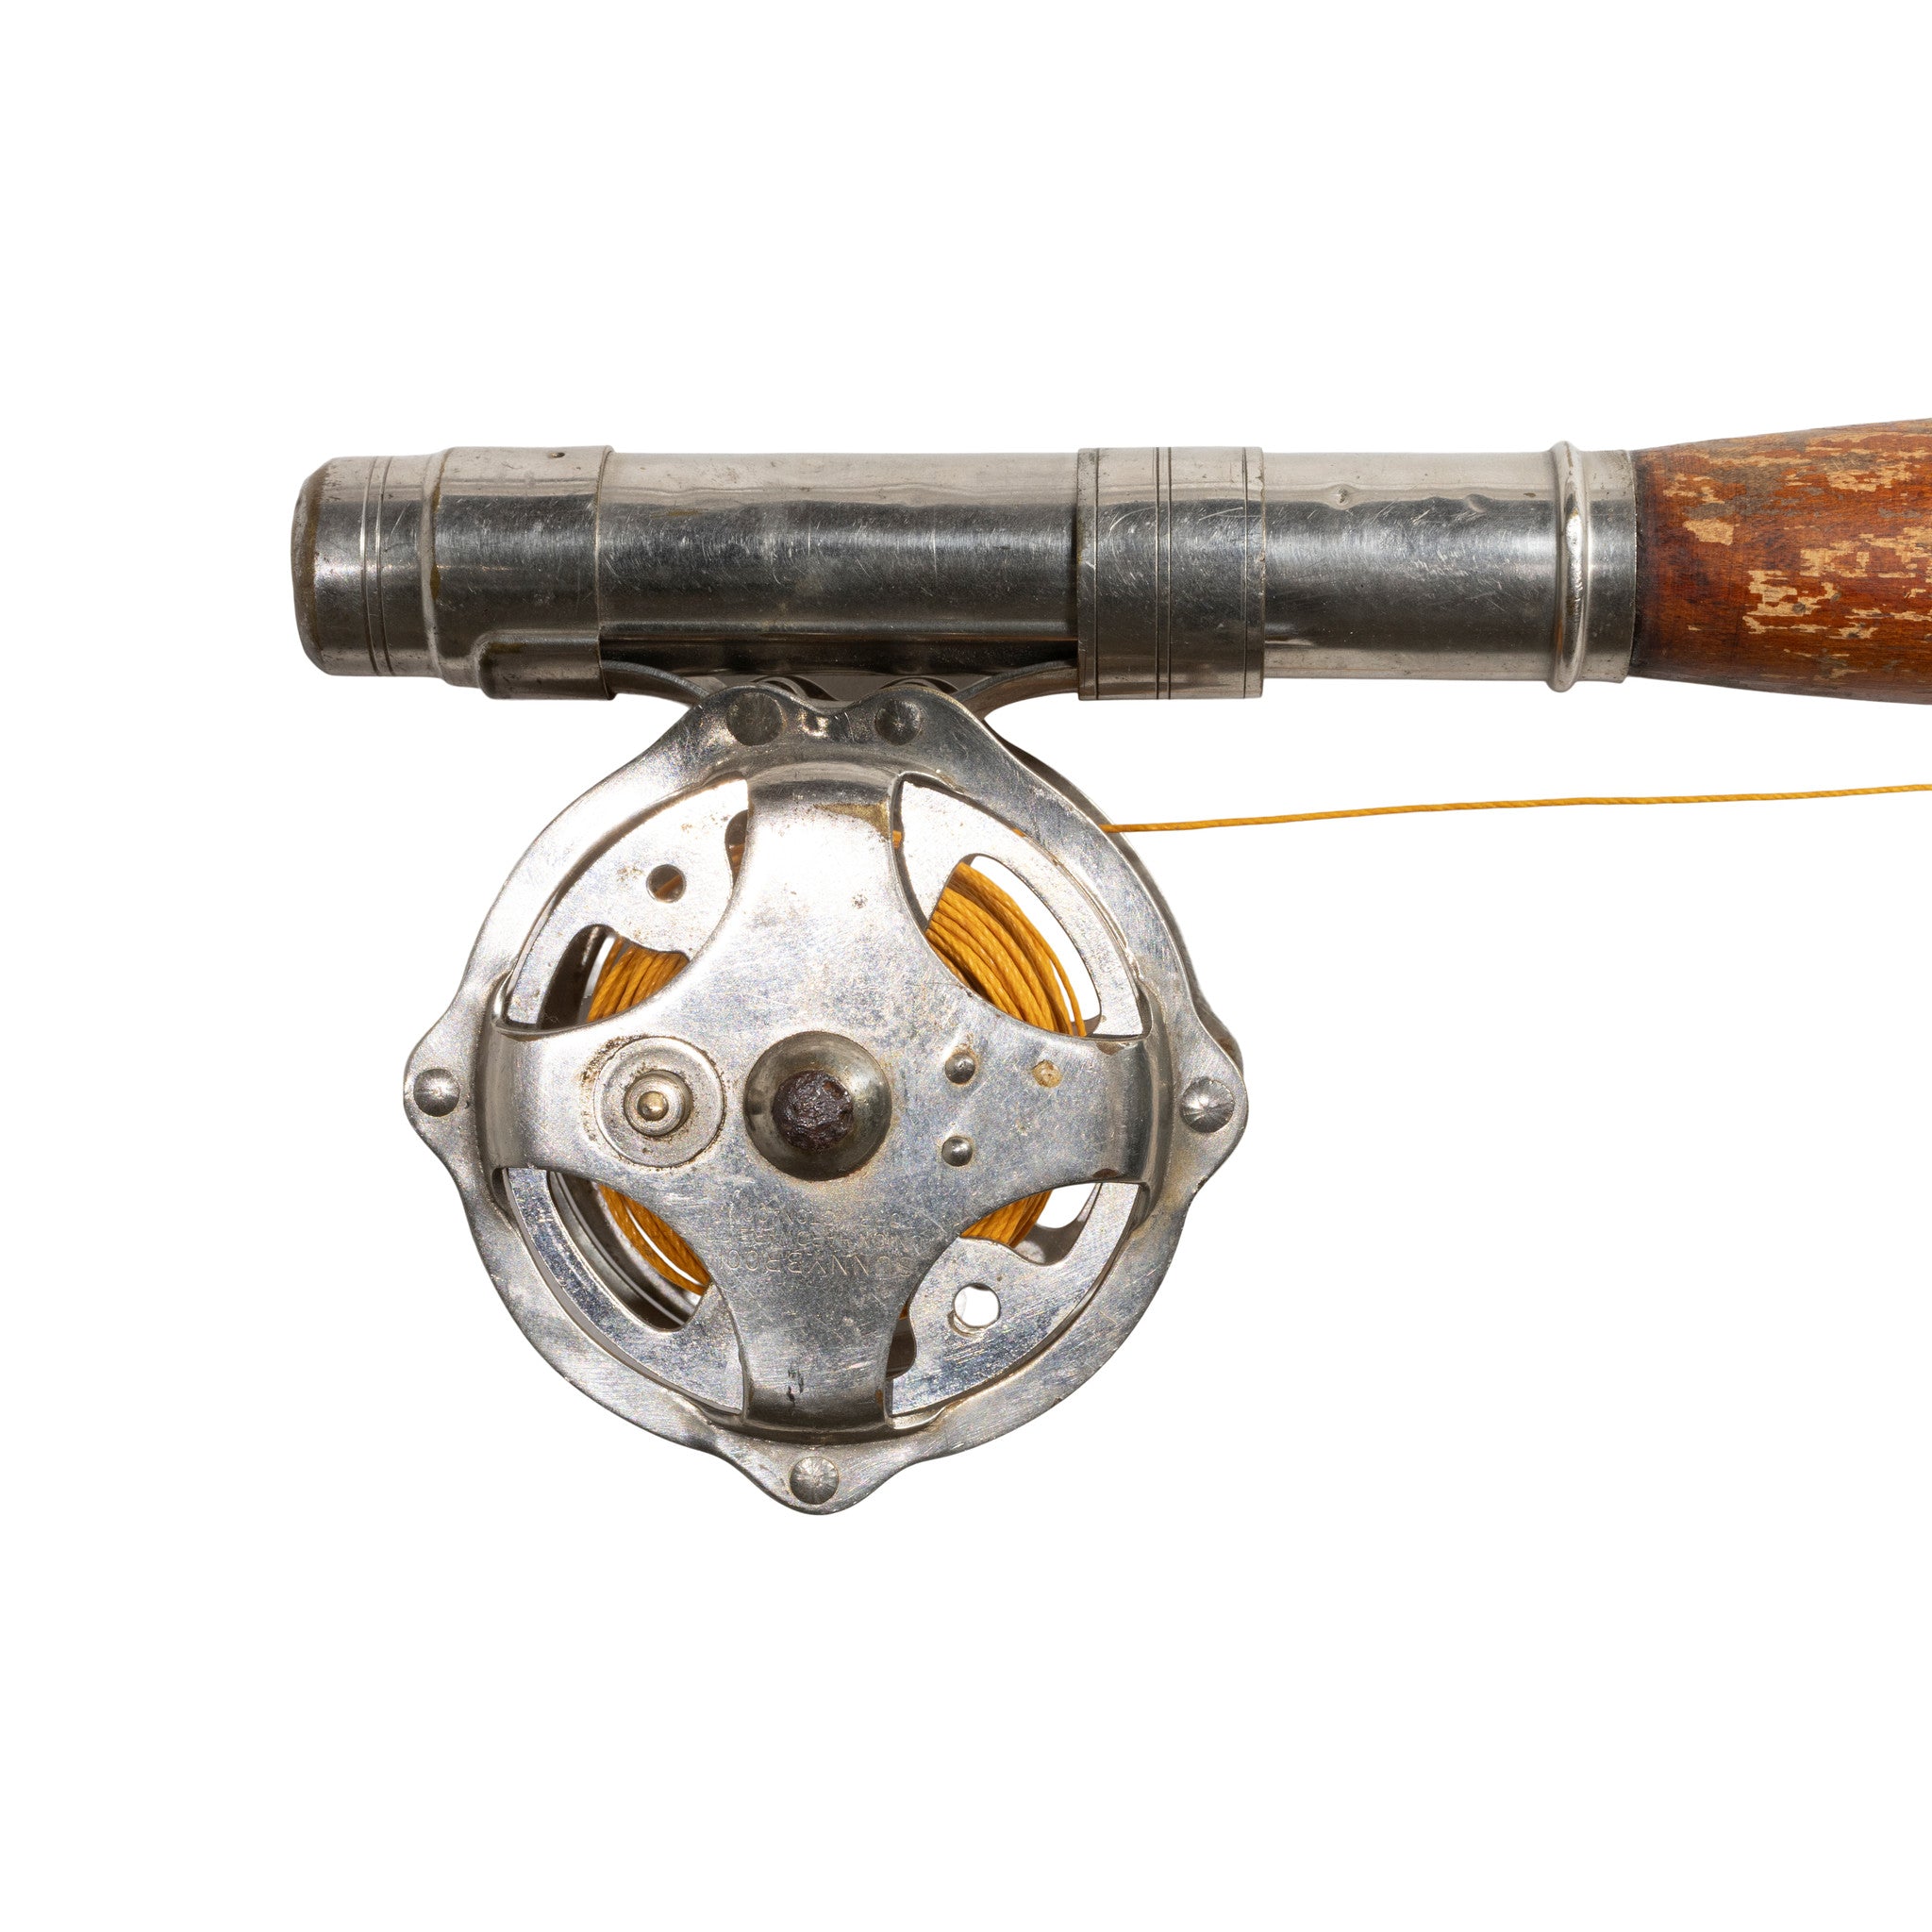 Early Fly Fishing Pole — Cisco's Gallery